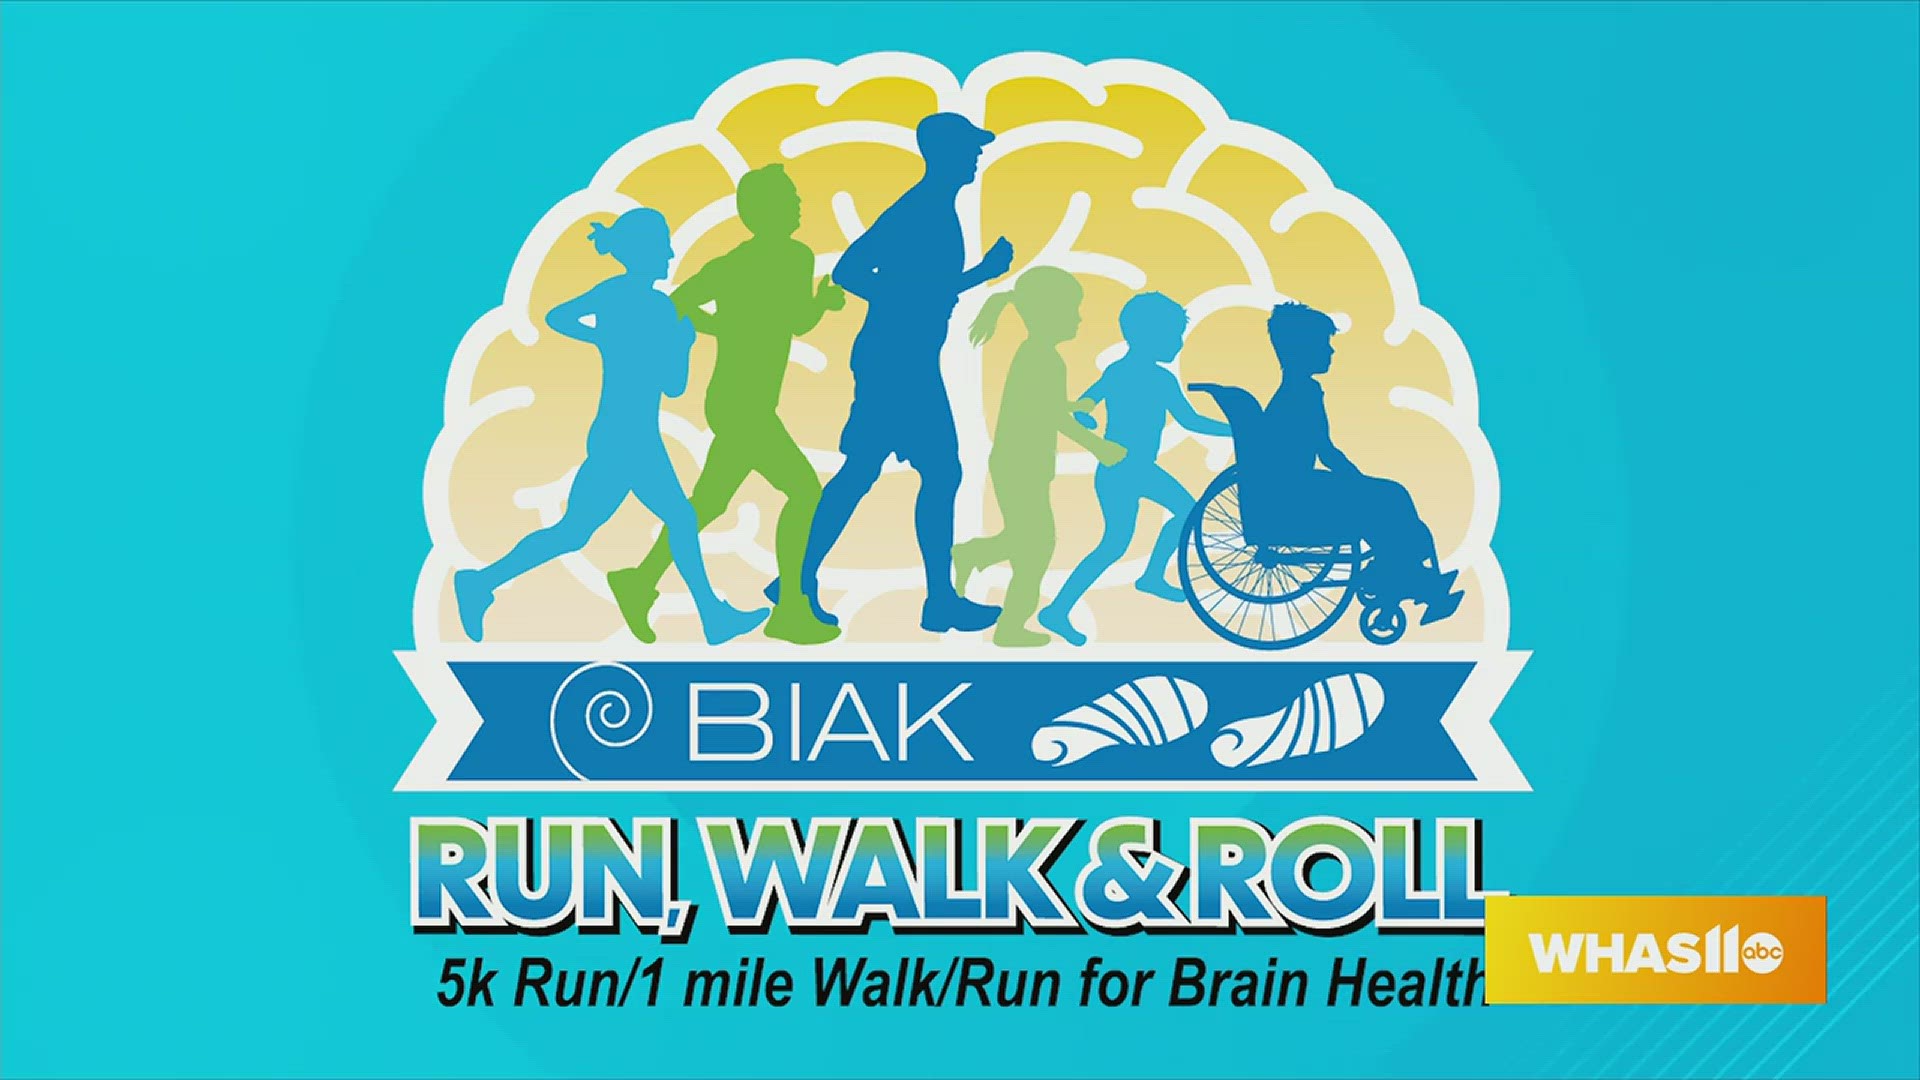 The Run, Walk & Roll Event is happening on Saturday, May 11th and is open to the community.